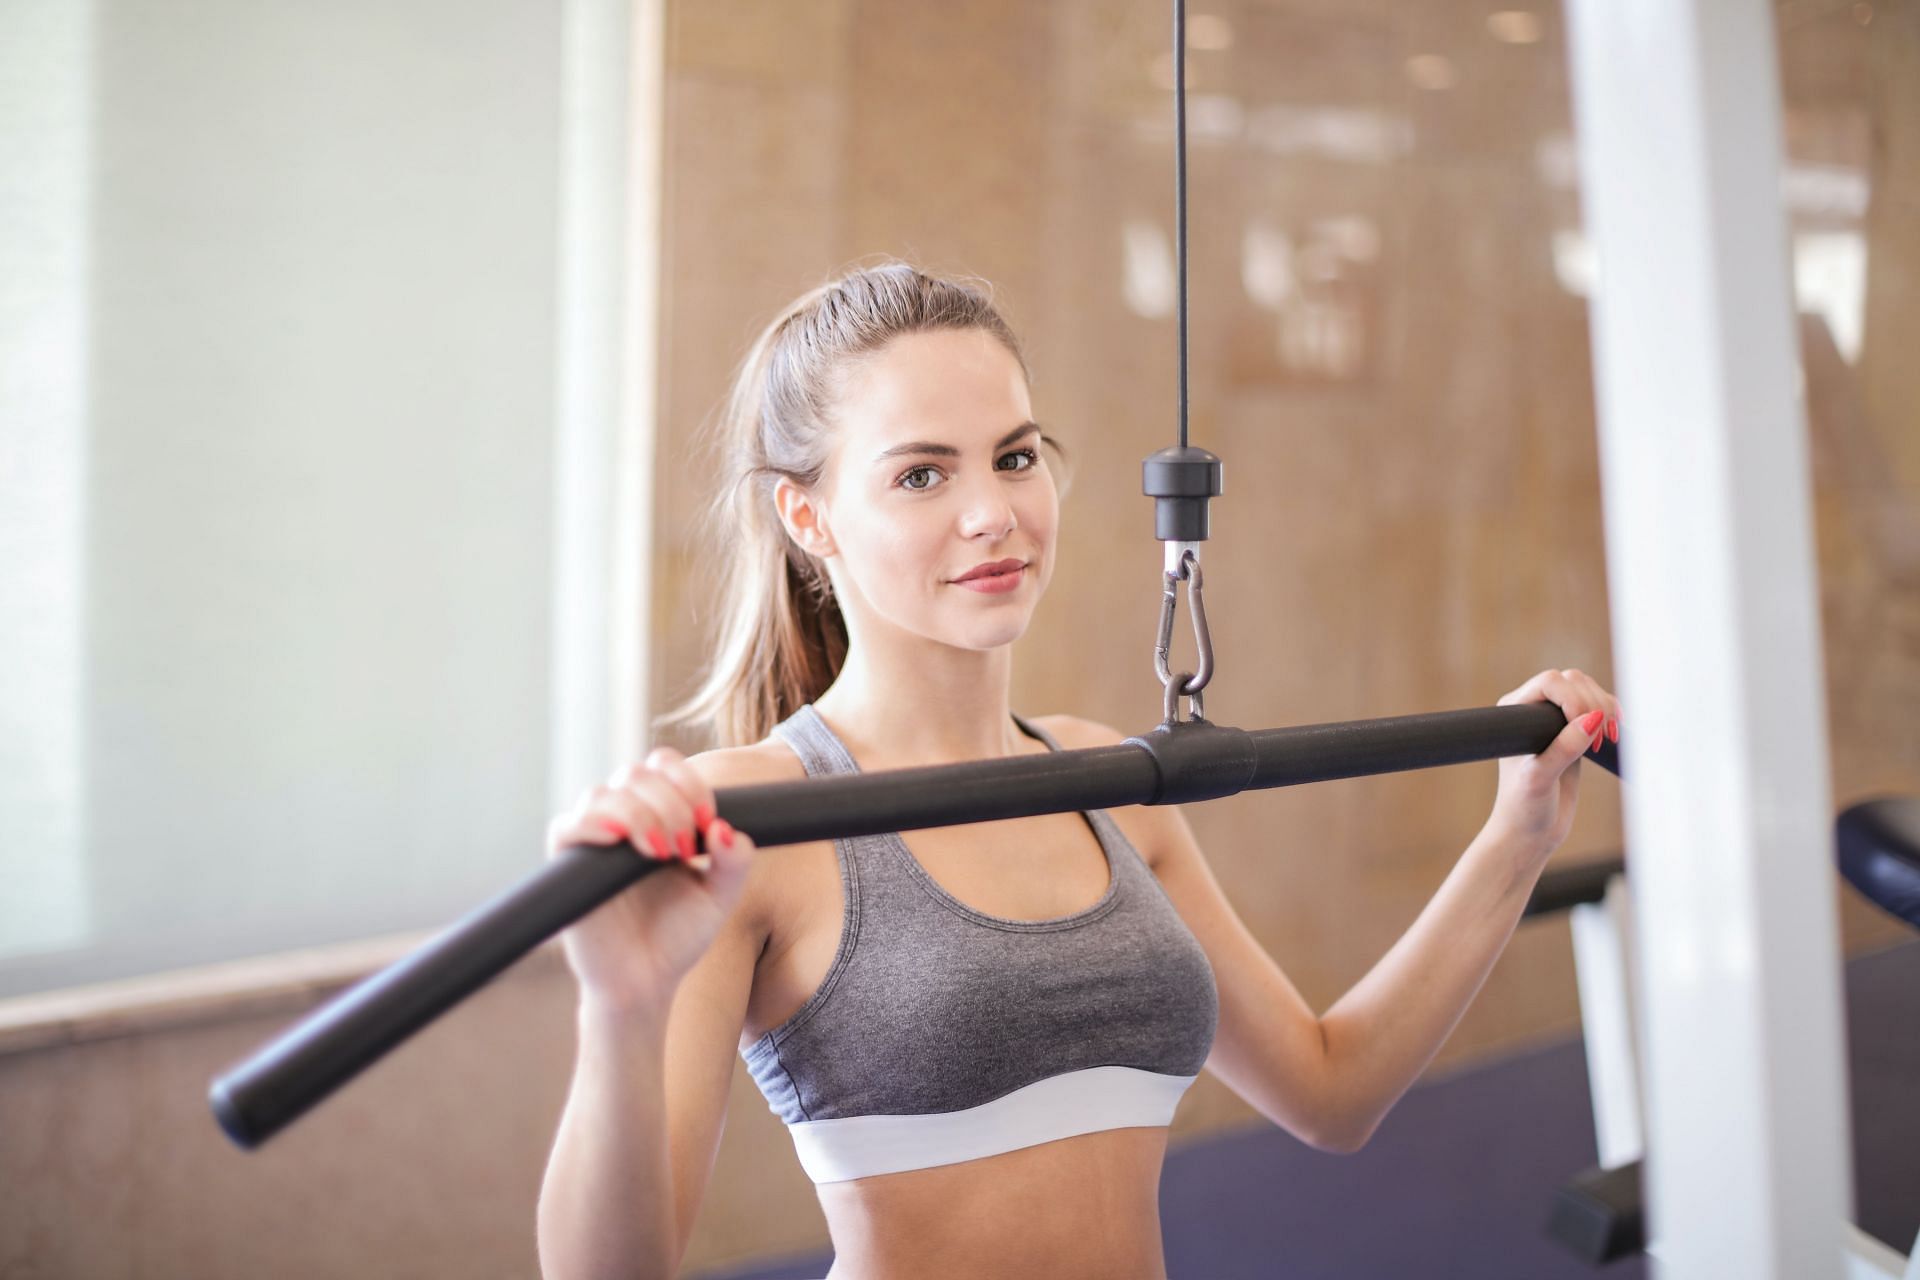 Pull exercises, often known as a pull-day training session, focuses on contracting muscles (Image via Pexels/Andrea Piacquadio)